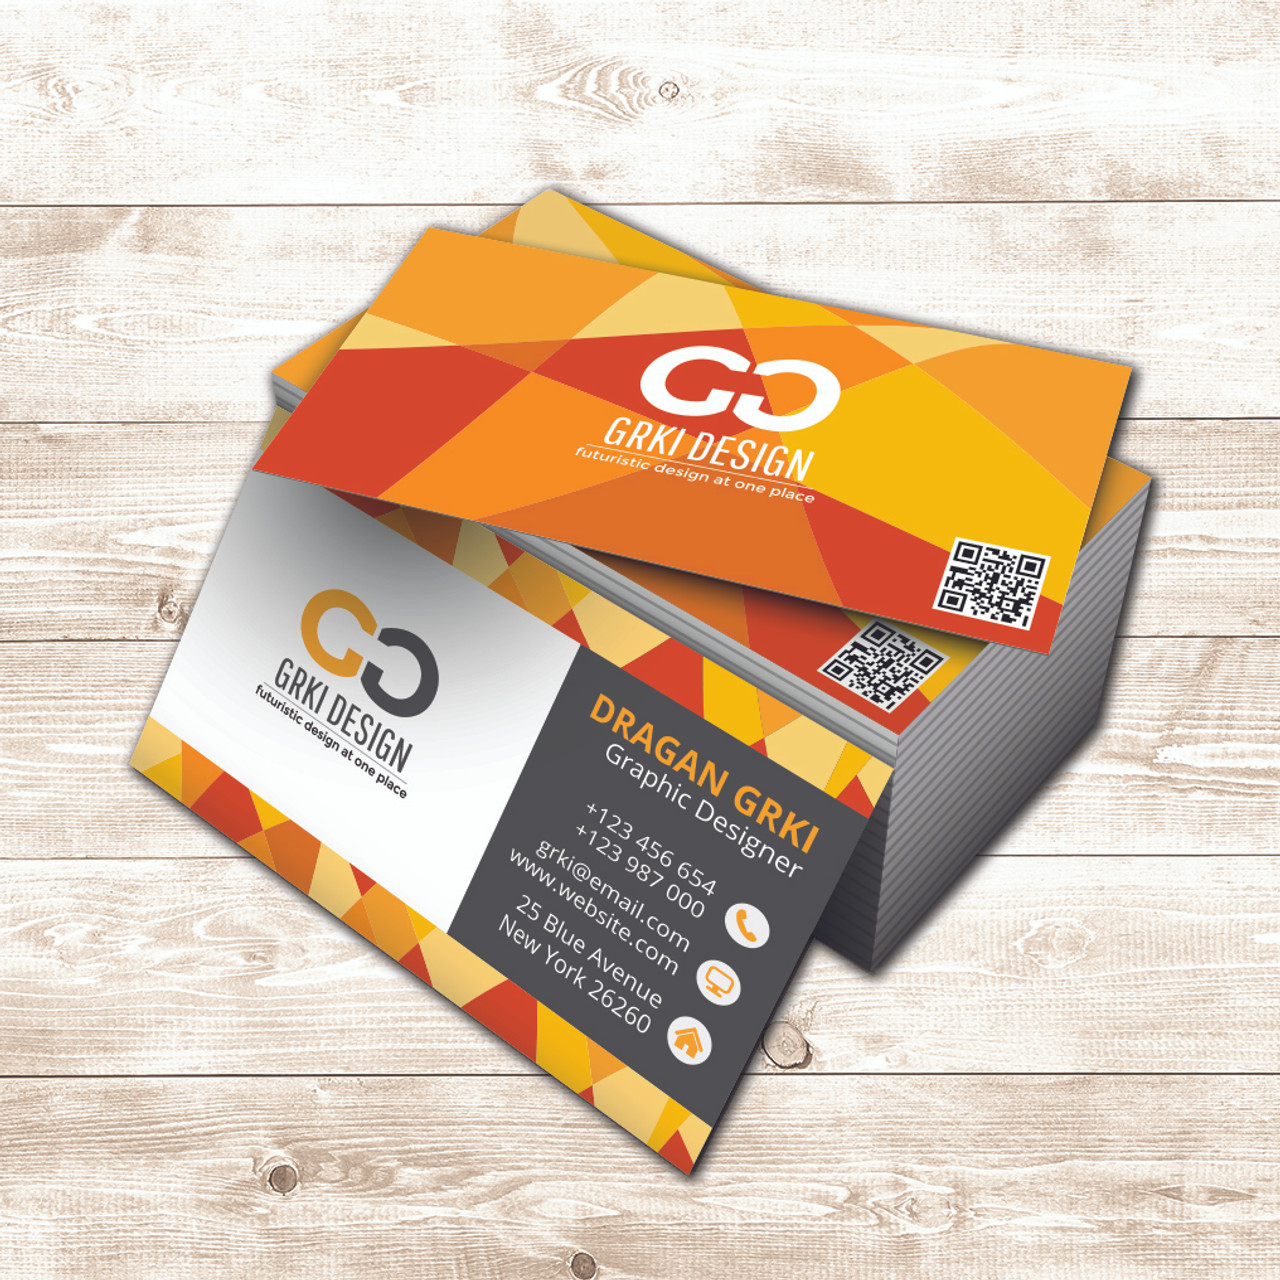 Door Hangers Printed in Full Color on 16pt Card Stock, with UV